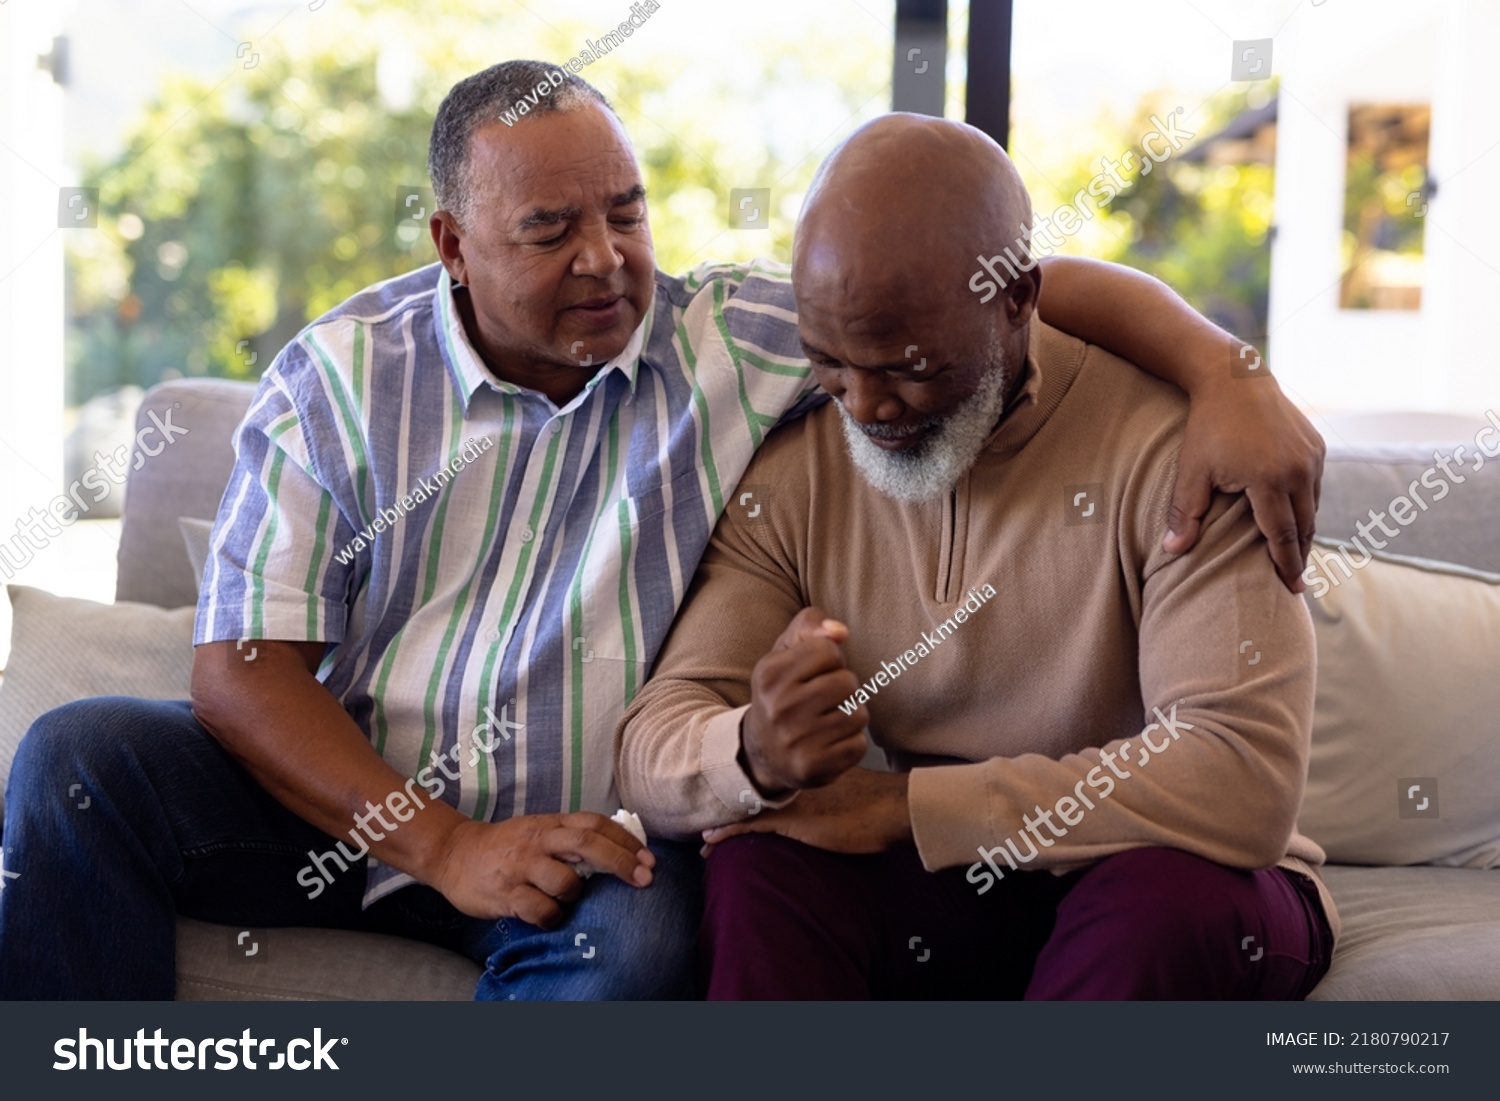 Multiracial senior man consoling male friend crying while sitting on sofa in nursing home. Sadness, togetherness, comfort, unaltered, emotional stress, support, assisted living, retirement concept. #2180790217